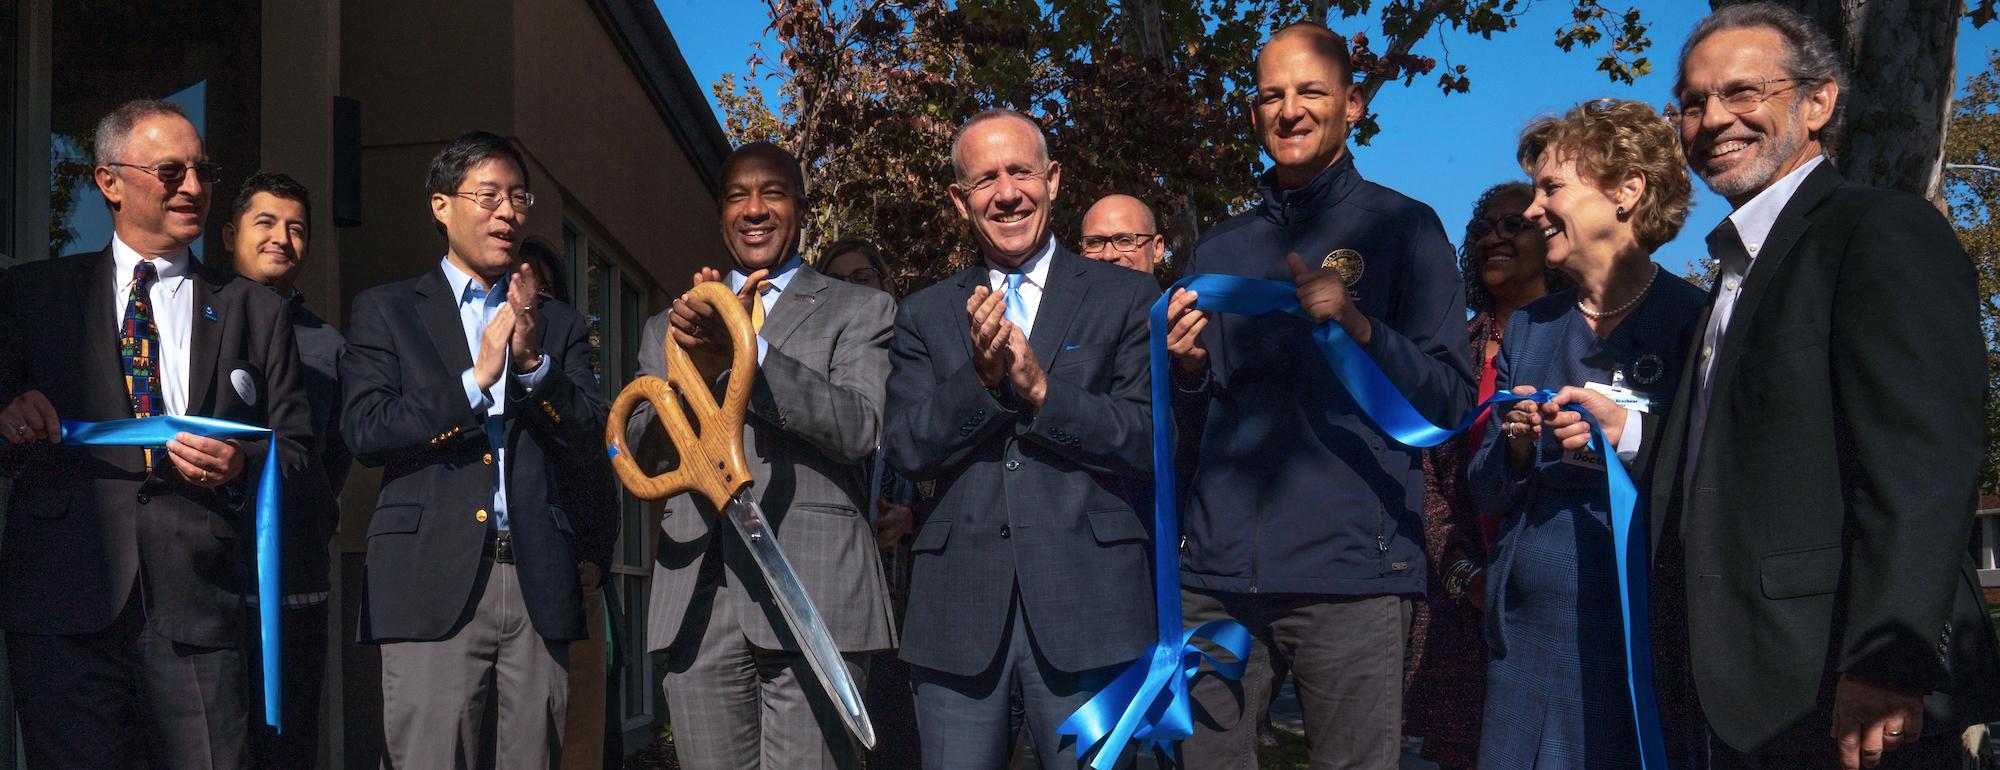 Chancellor Gary May and a team of people cut a ribbon at UC Davis Aggie Square